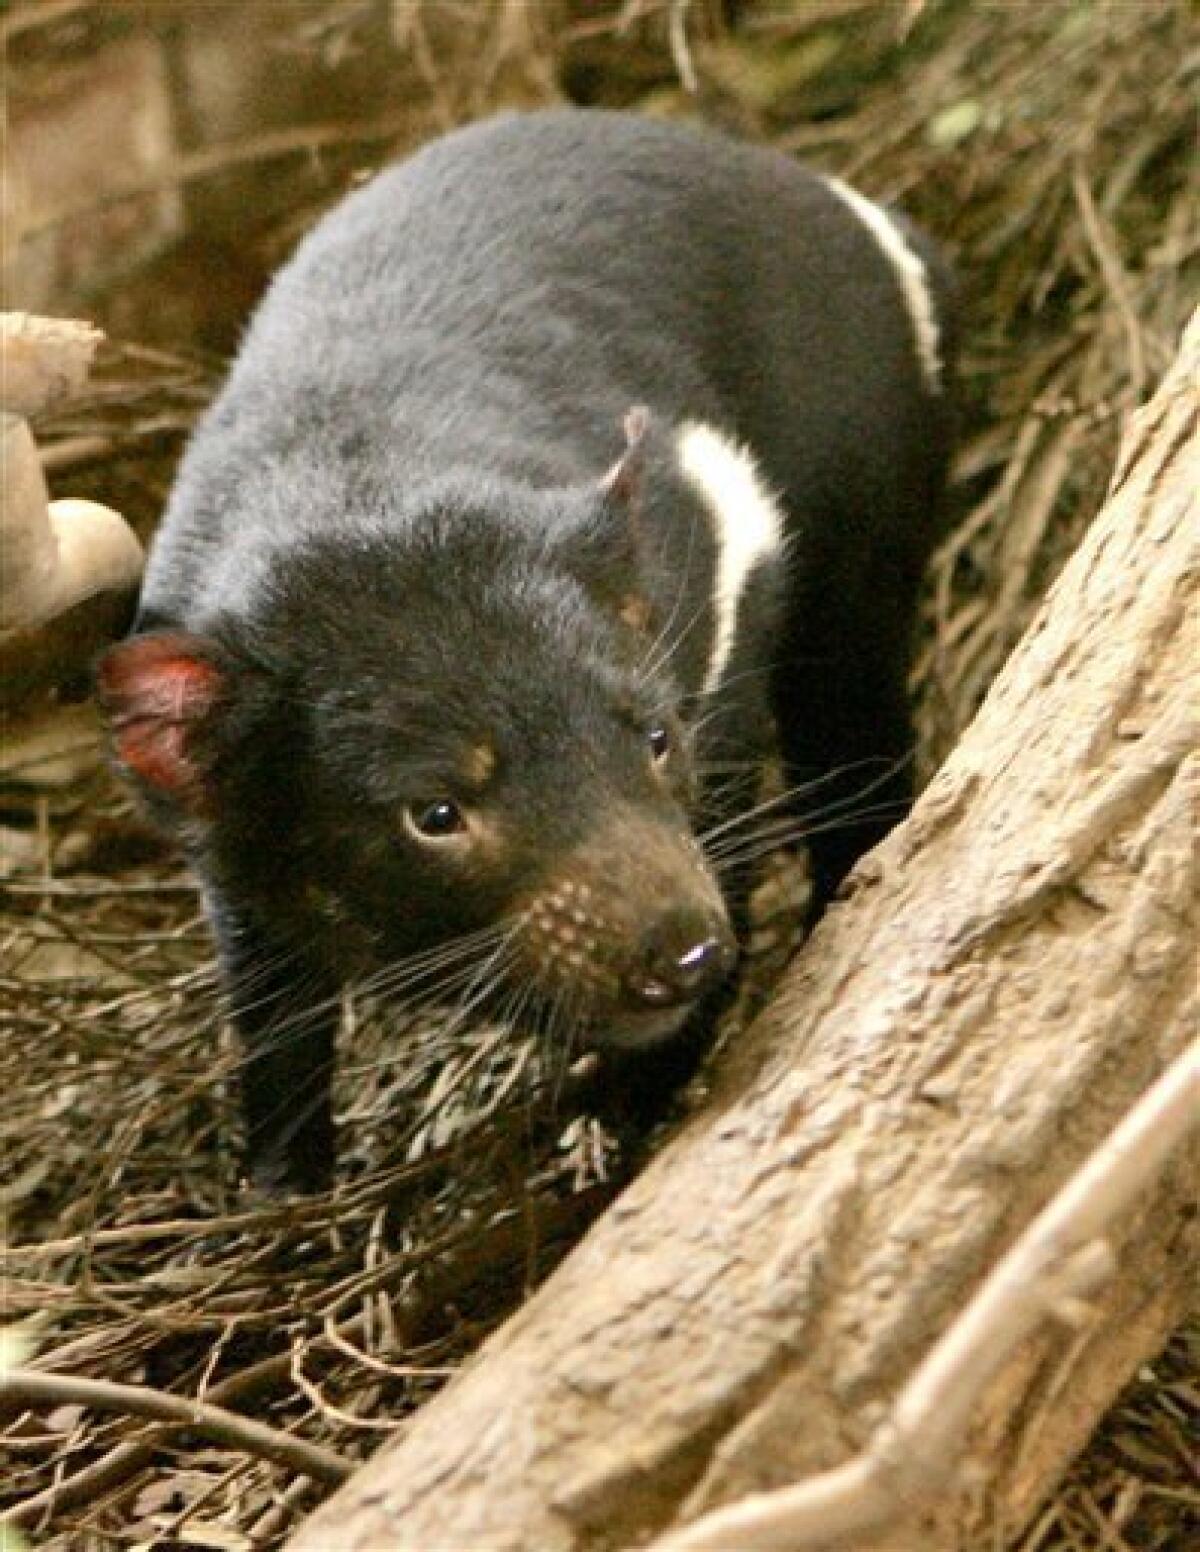 Tasmanian devil cancer unlikely to cause exti